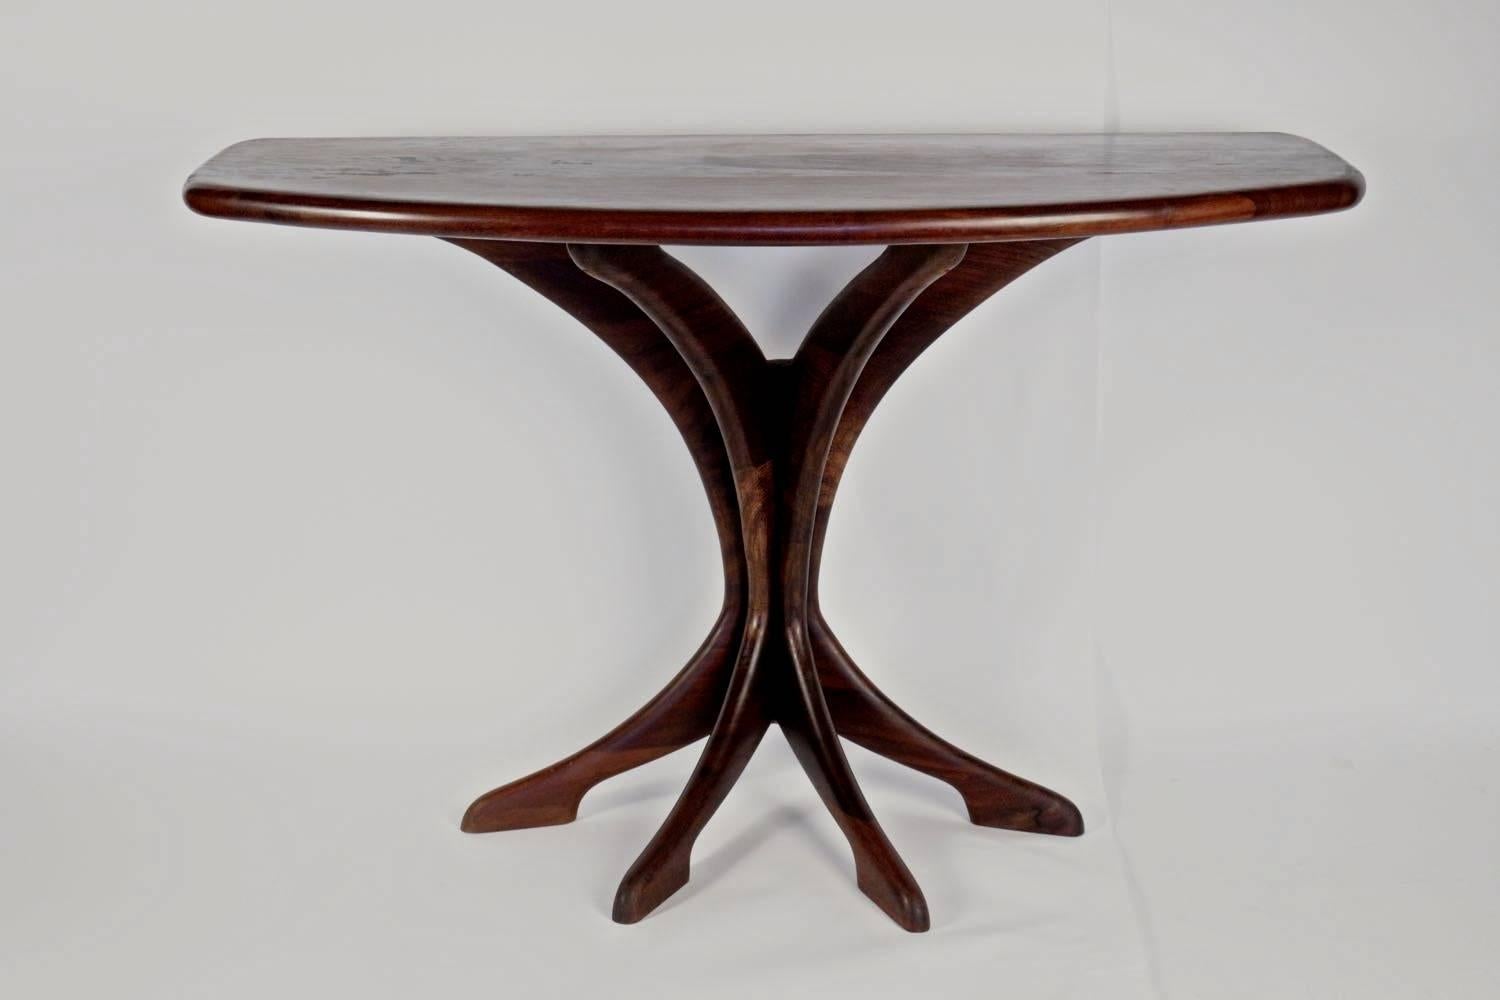 1950s rosewood console Osvaldo Borsani. 

Composed of a large semi-circular arched top in solid rosewood resting on four curved solid rosewood legs distributed in the form of a fan meeting on the lower part and forming a pretty base formed by the 4